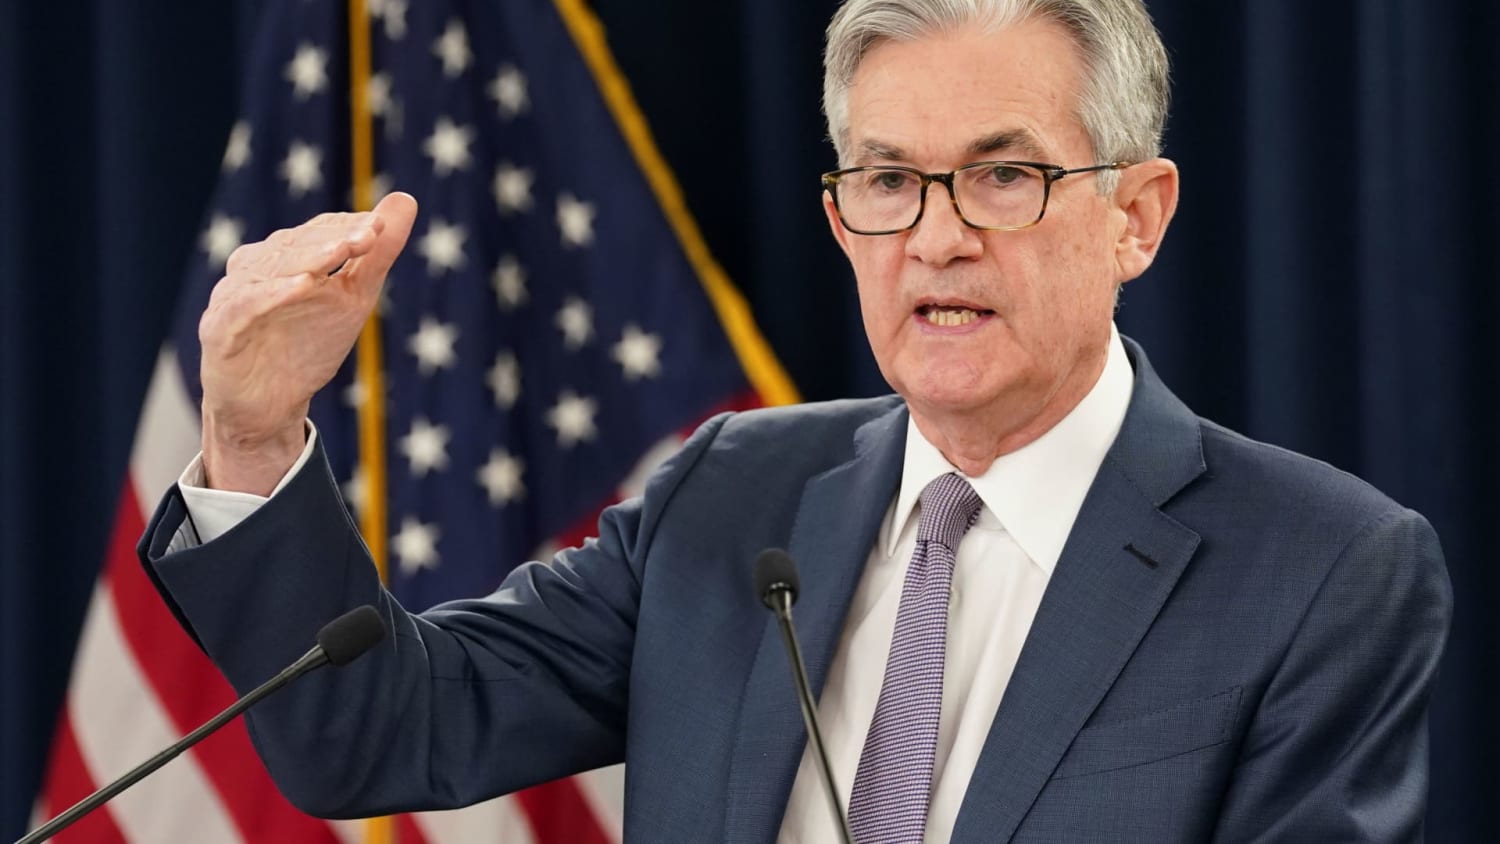 Fed sees interest rates staying near zero through 2022, GDP bouncing to 5% next year